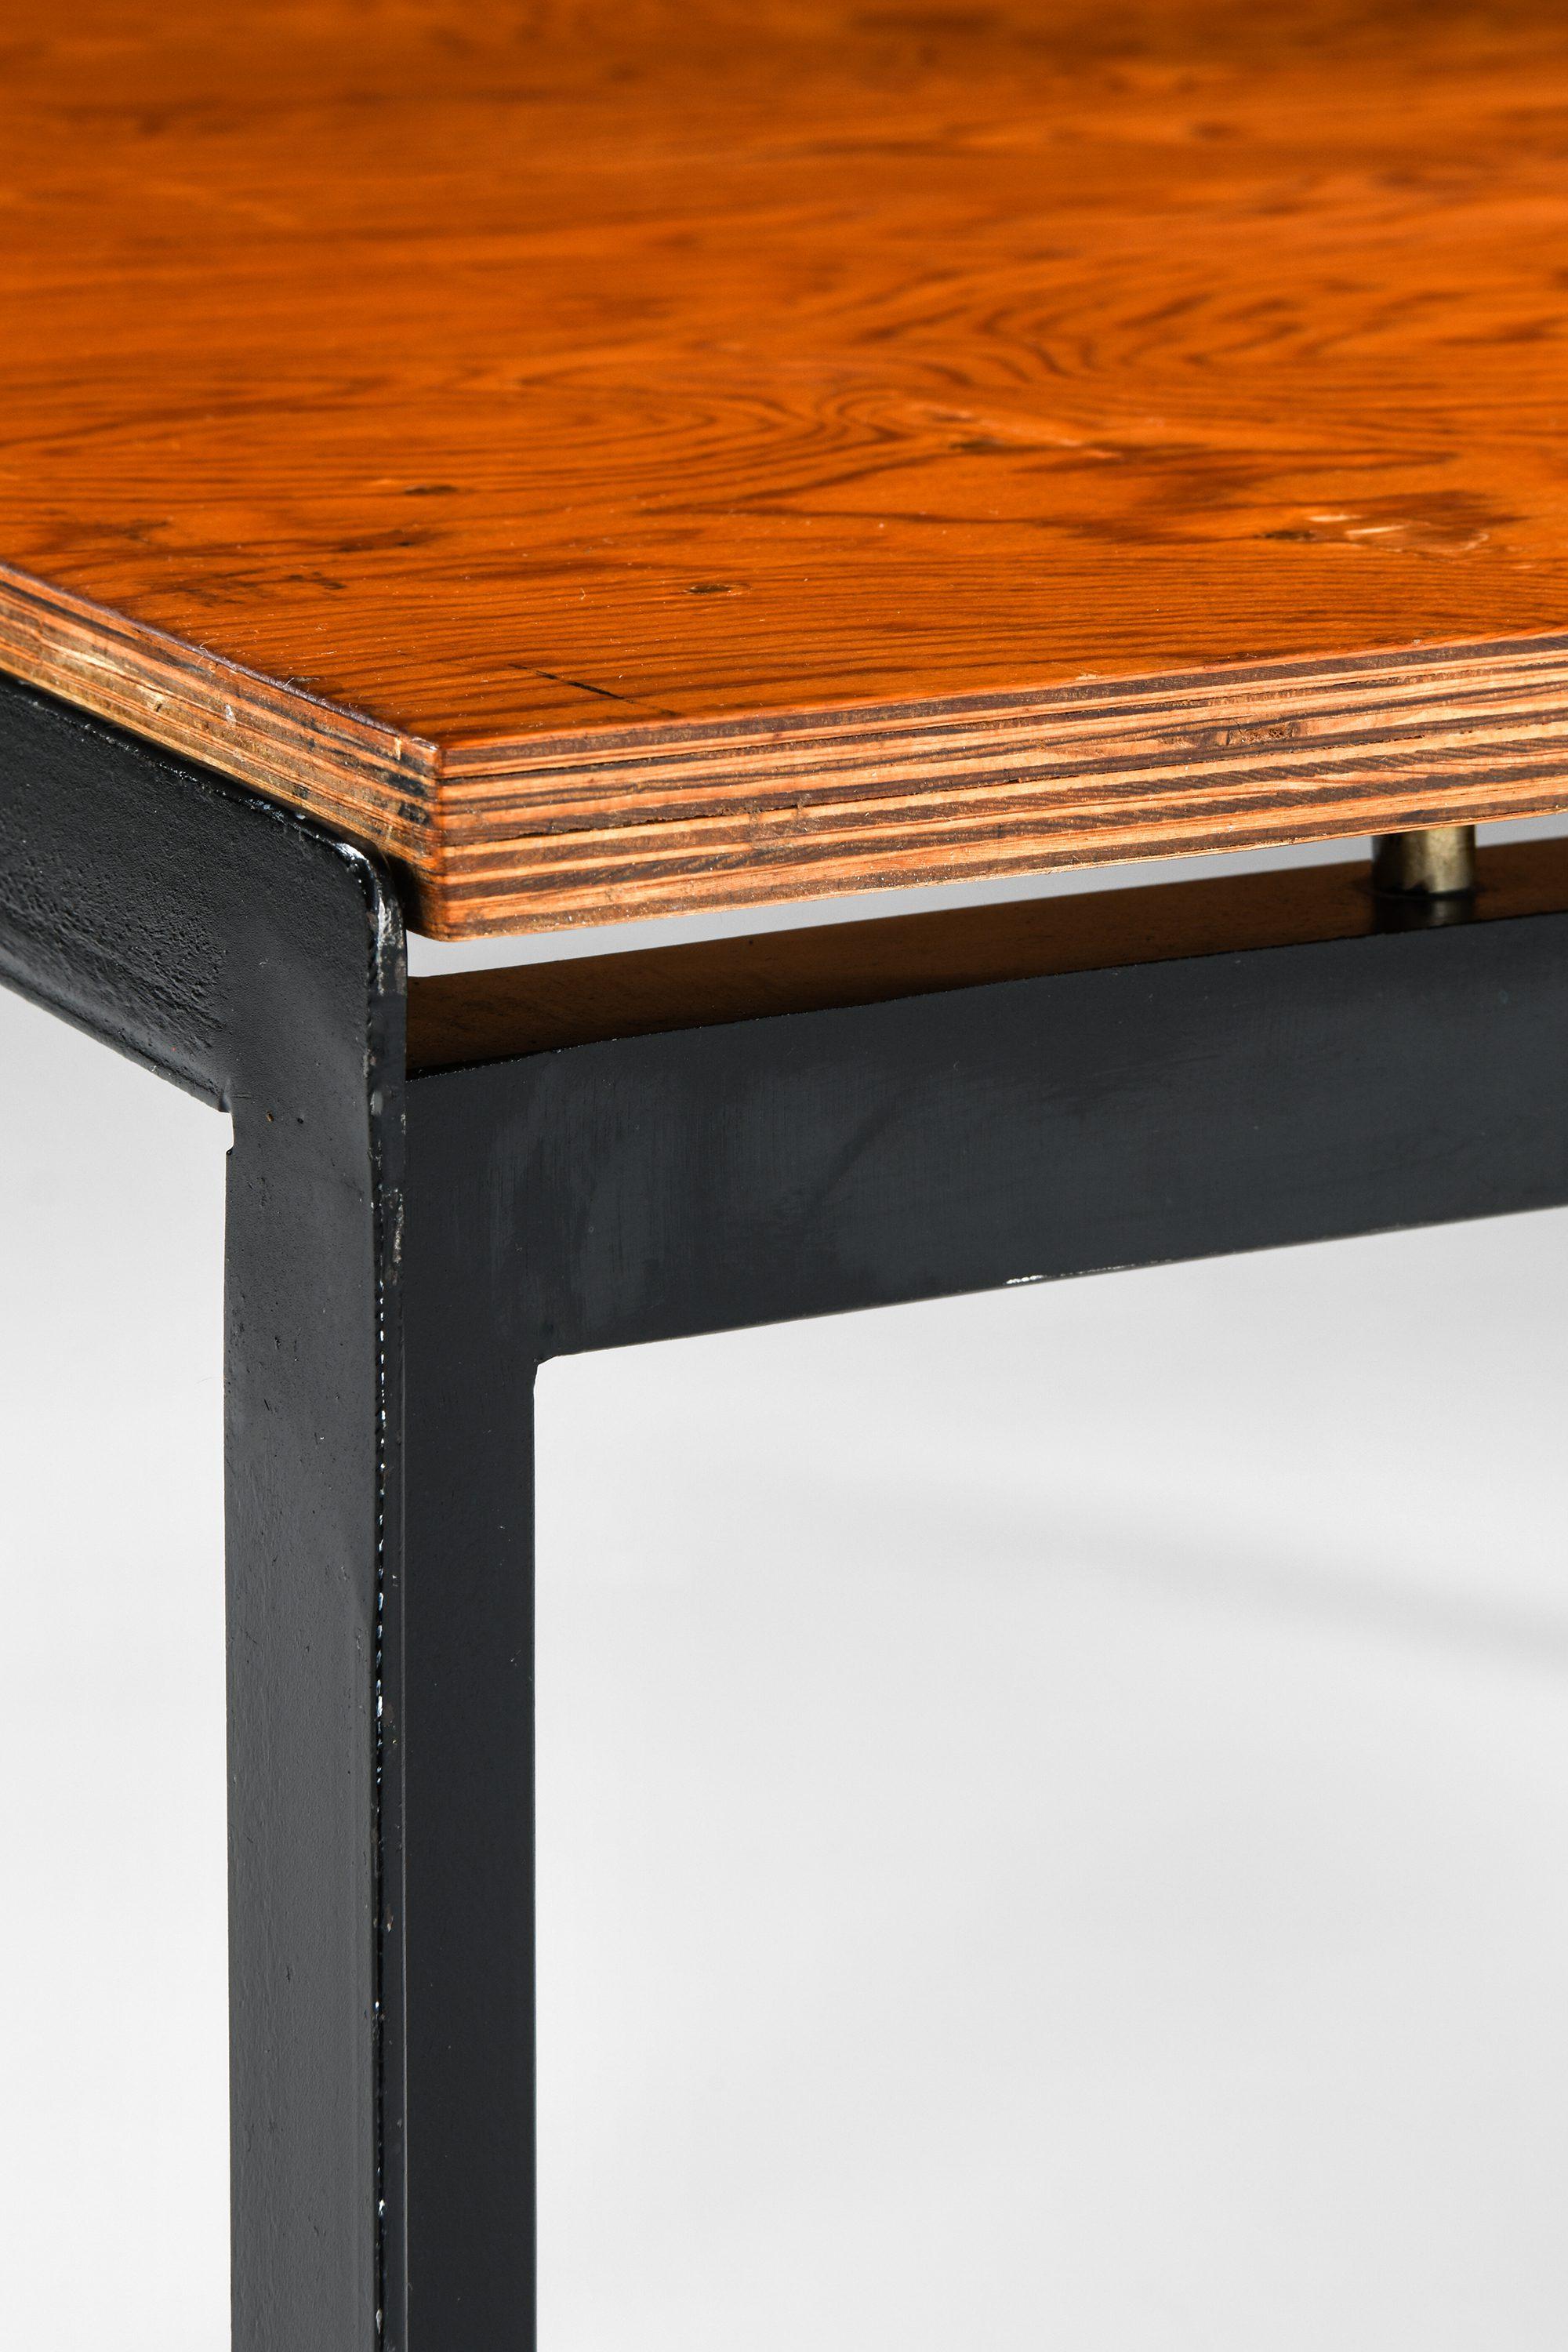 20th Century Academy Table in Black Lacquered Steel and Pine by Poul Kjærholm, 1950's For Sale